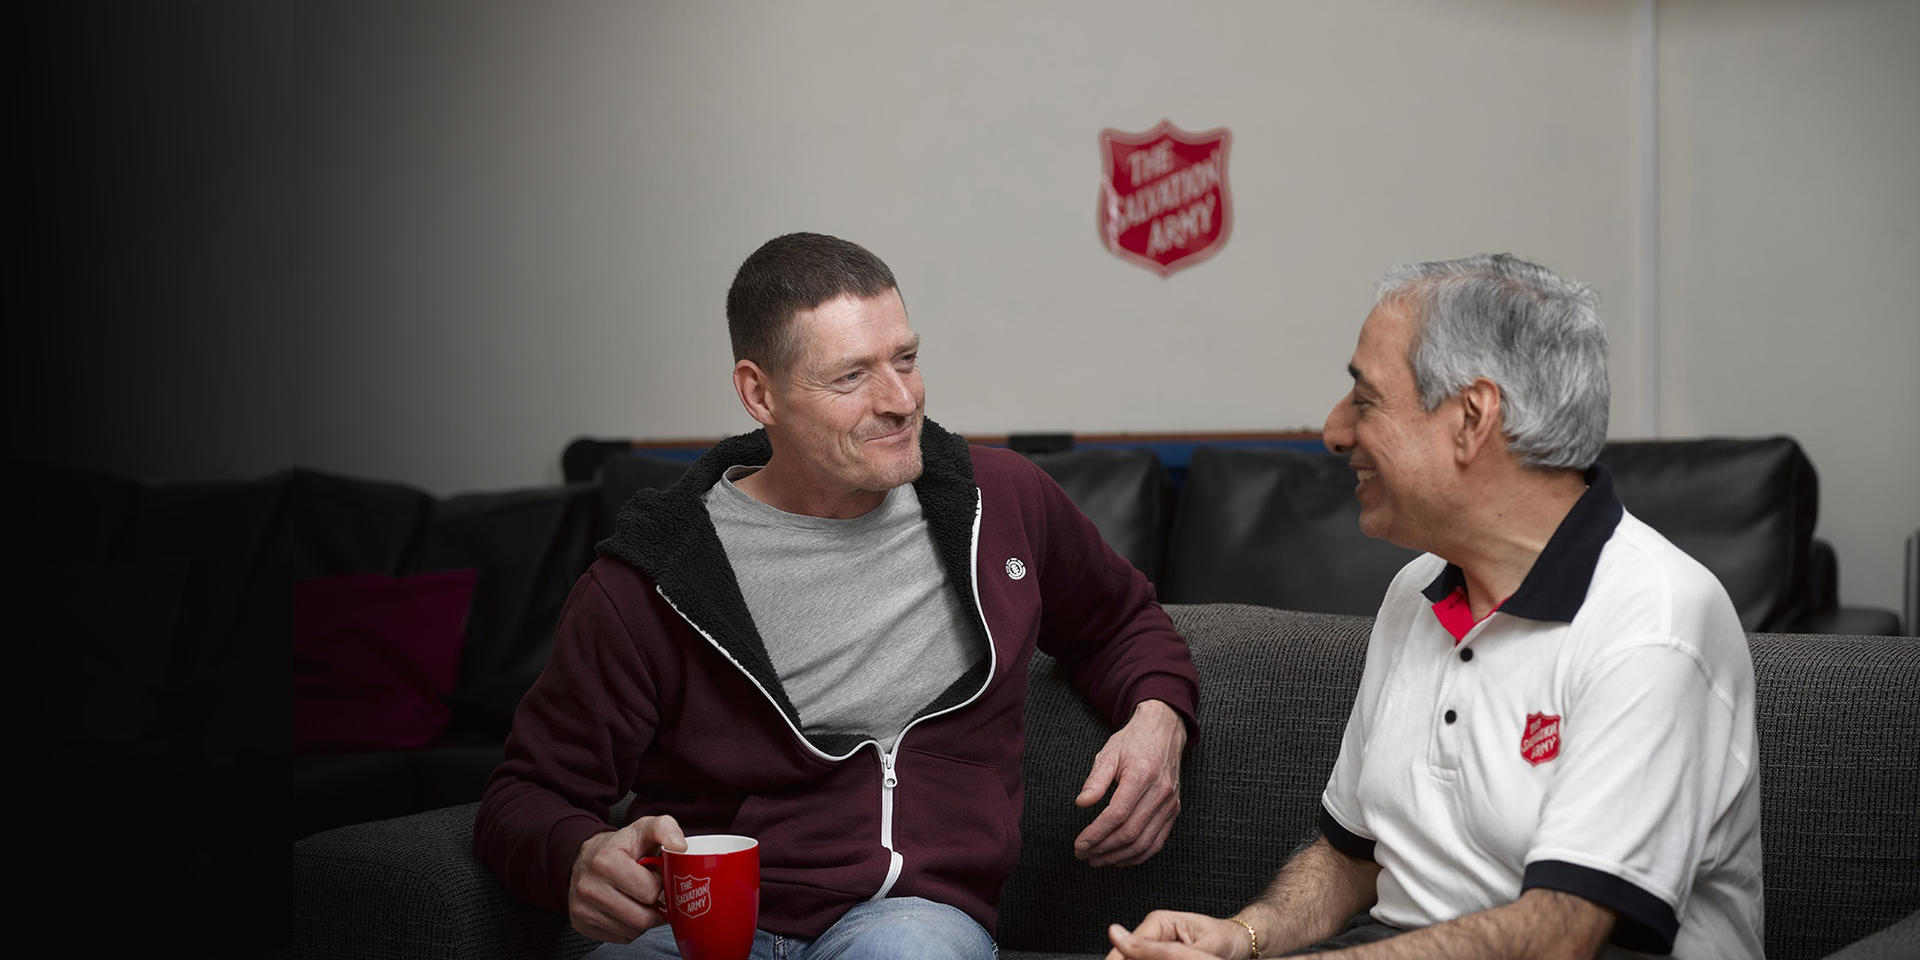 Salvation army worker helping someone